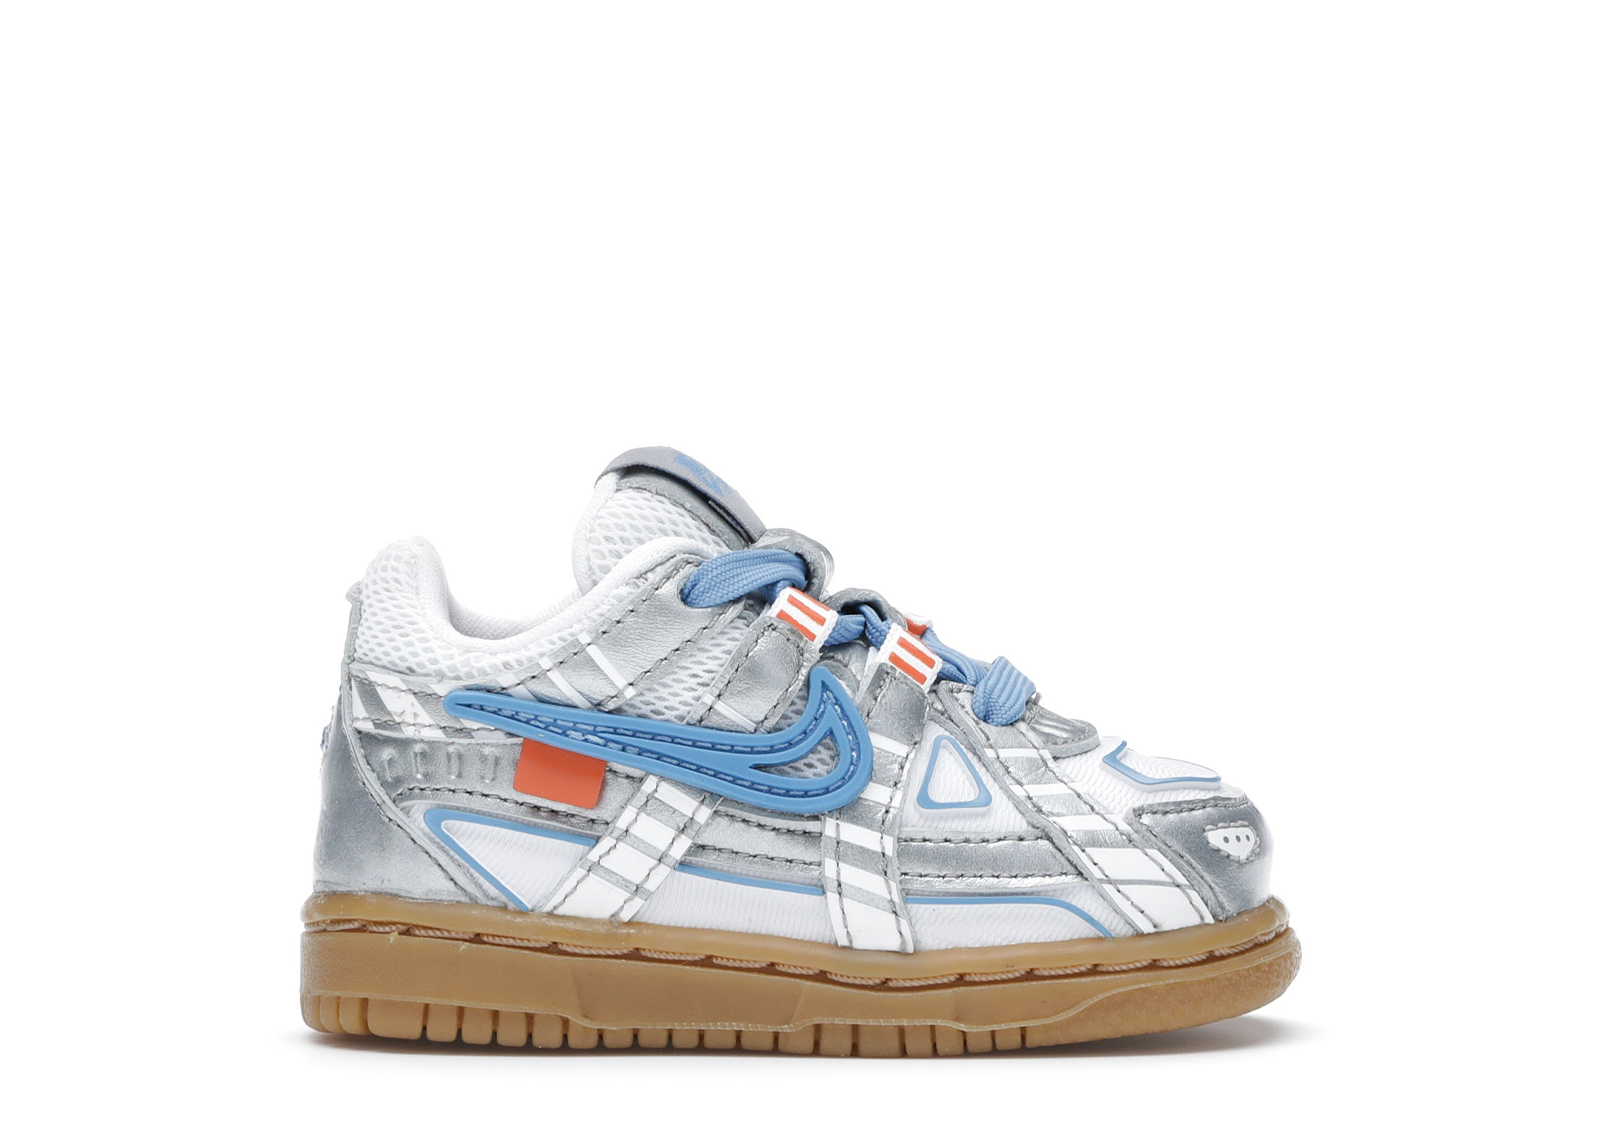 nike rubber dunk x off white stockx